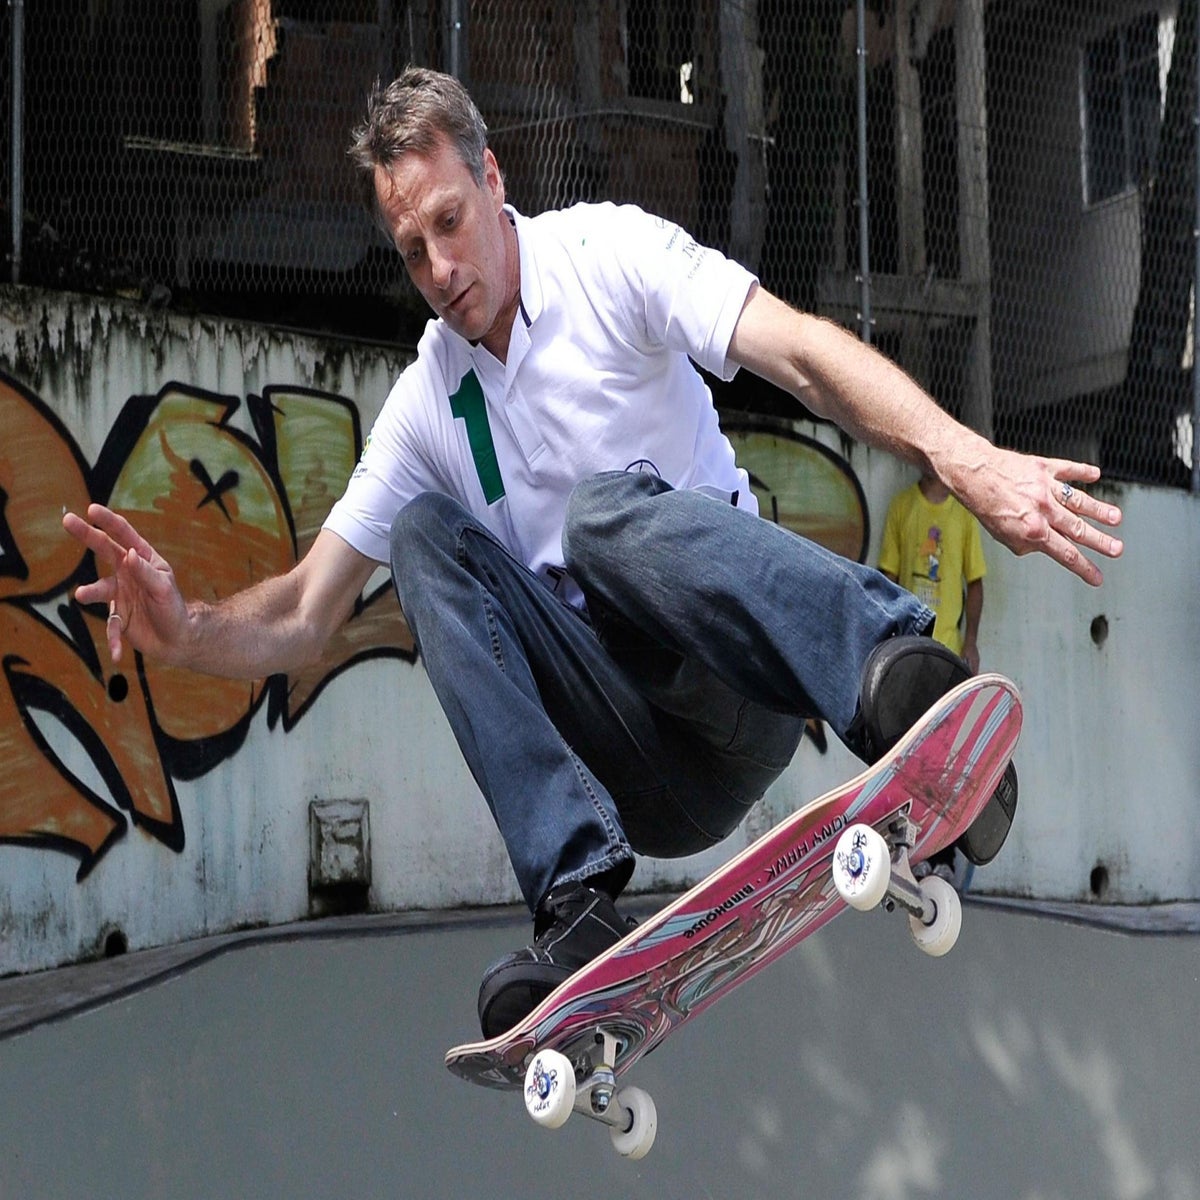 Tony Hawk - 2009 SHoF 2009 - Skateboarding Hall of Fame and Museum